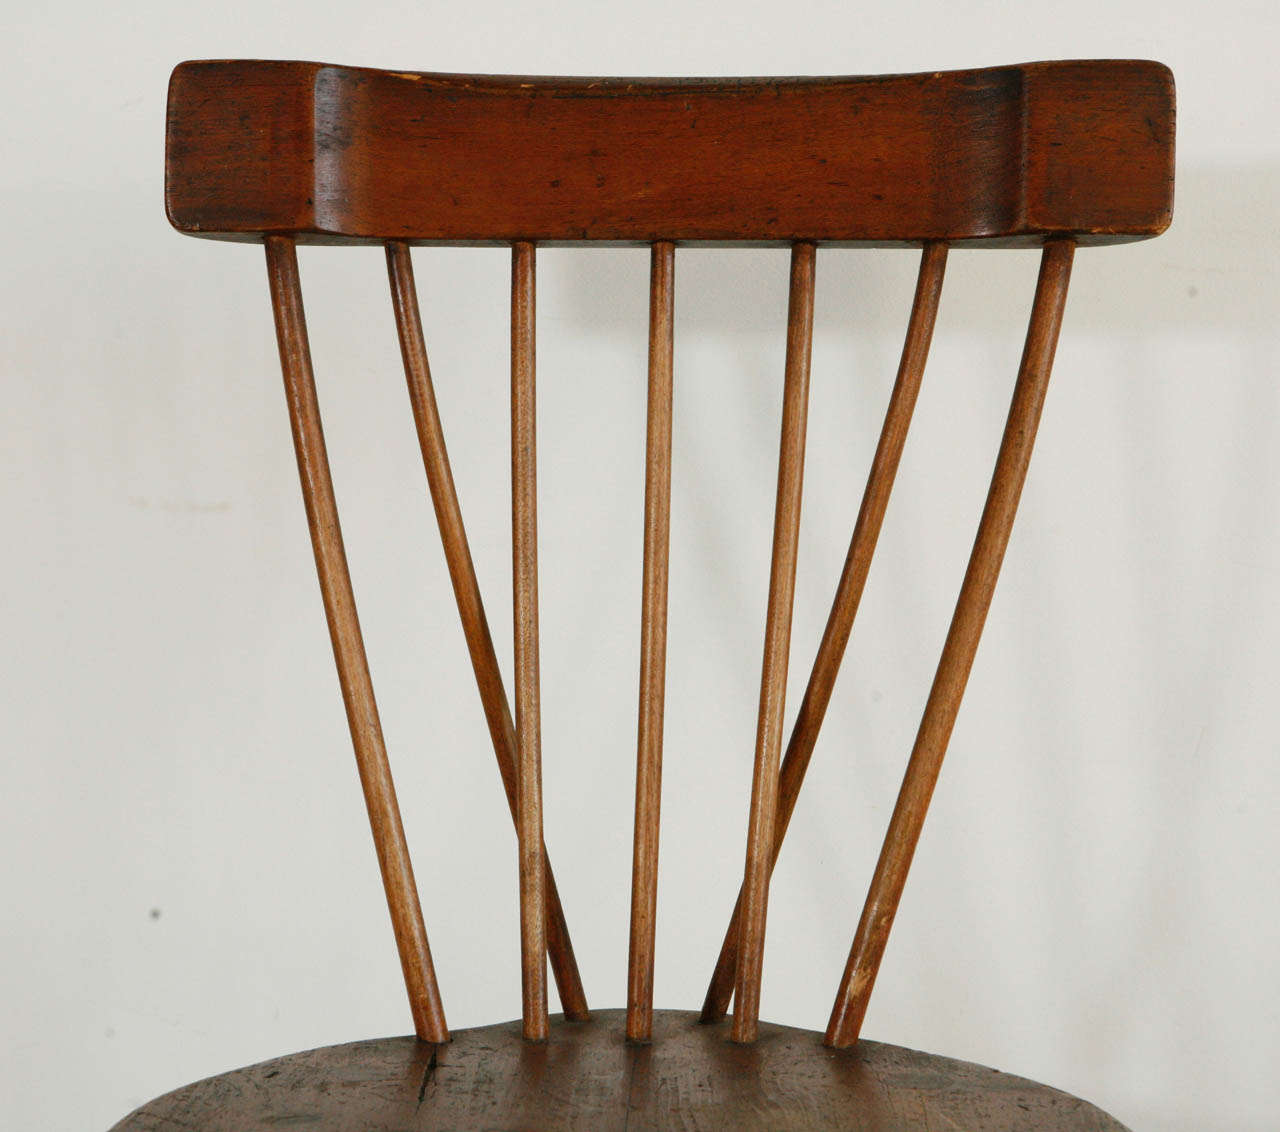 Schoolhouse Early American Bent Spindle Back Windsor Chair